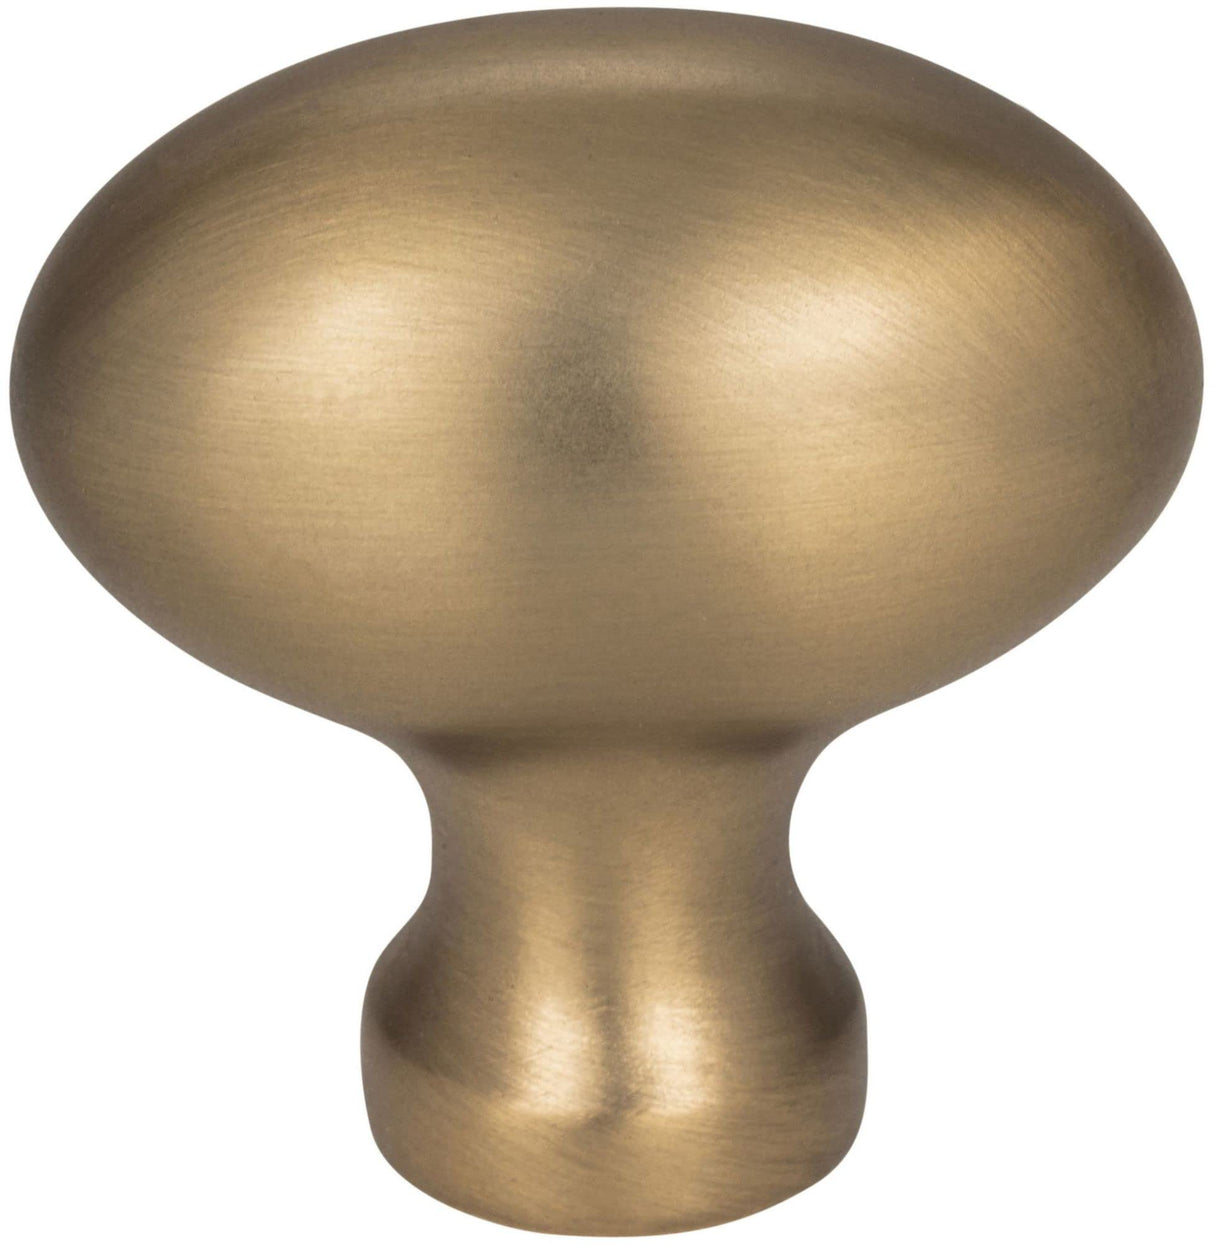 Jeffrey Alexander 3991DBAC 1-9/16" Overall Length Brushed Oil Rubbed Bronze Football Lyon Cabinet Knob